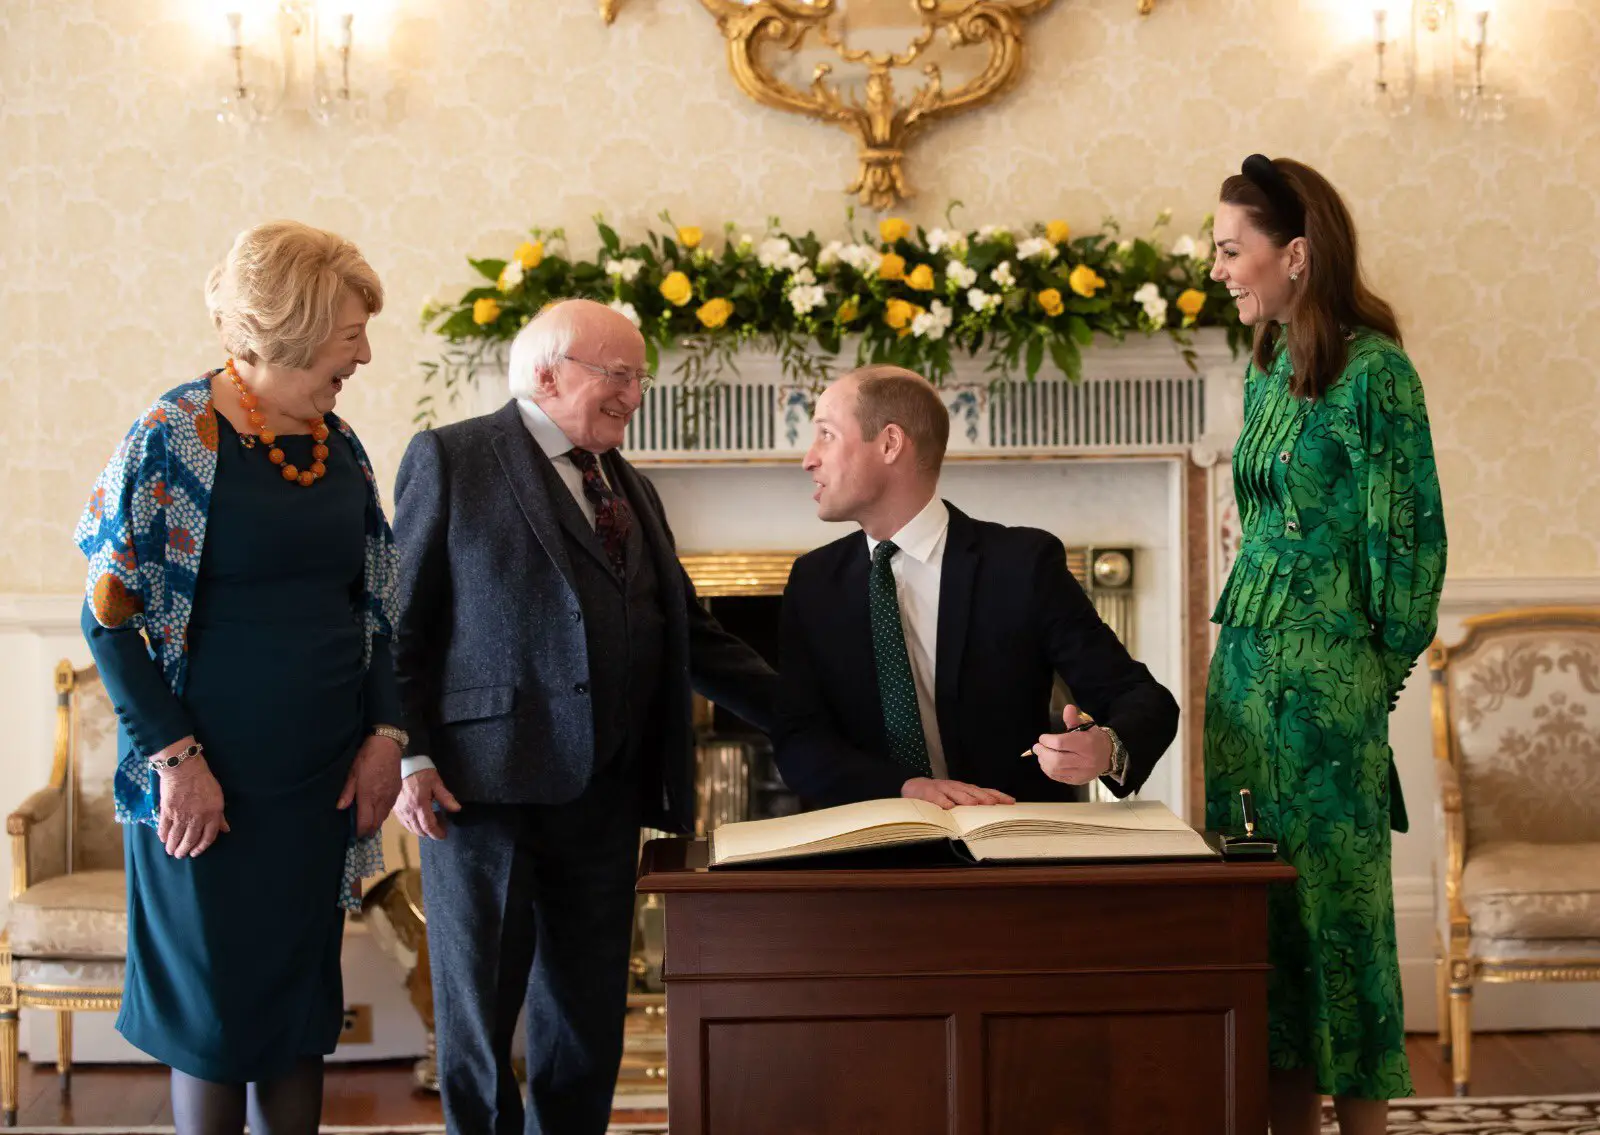 The Duke and Duchess of Cambridge signed the visitor's book before leaving